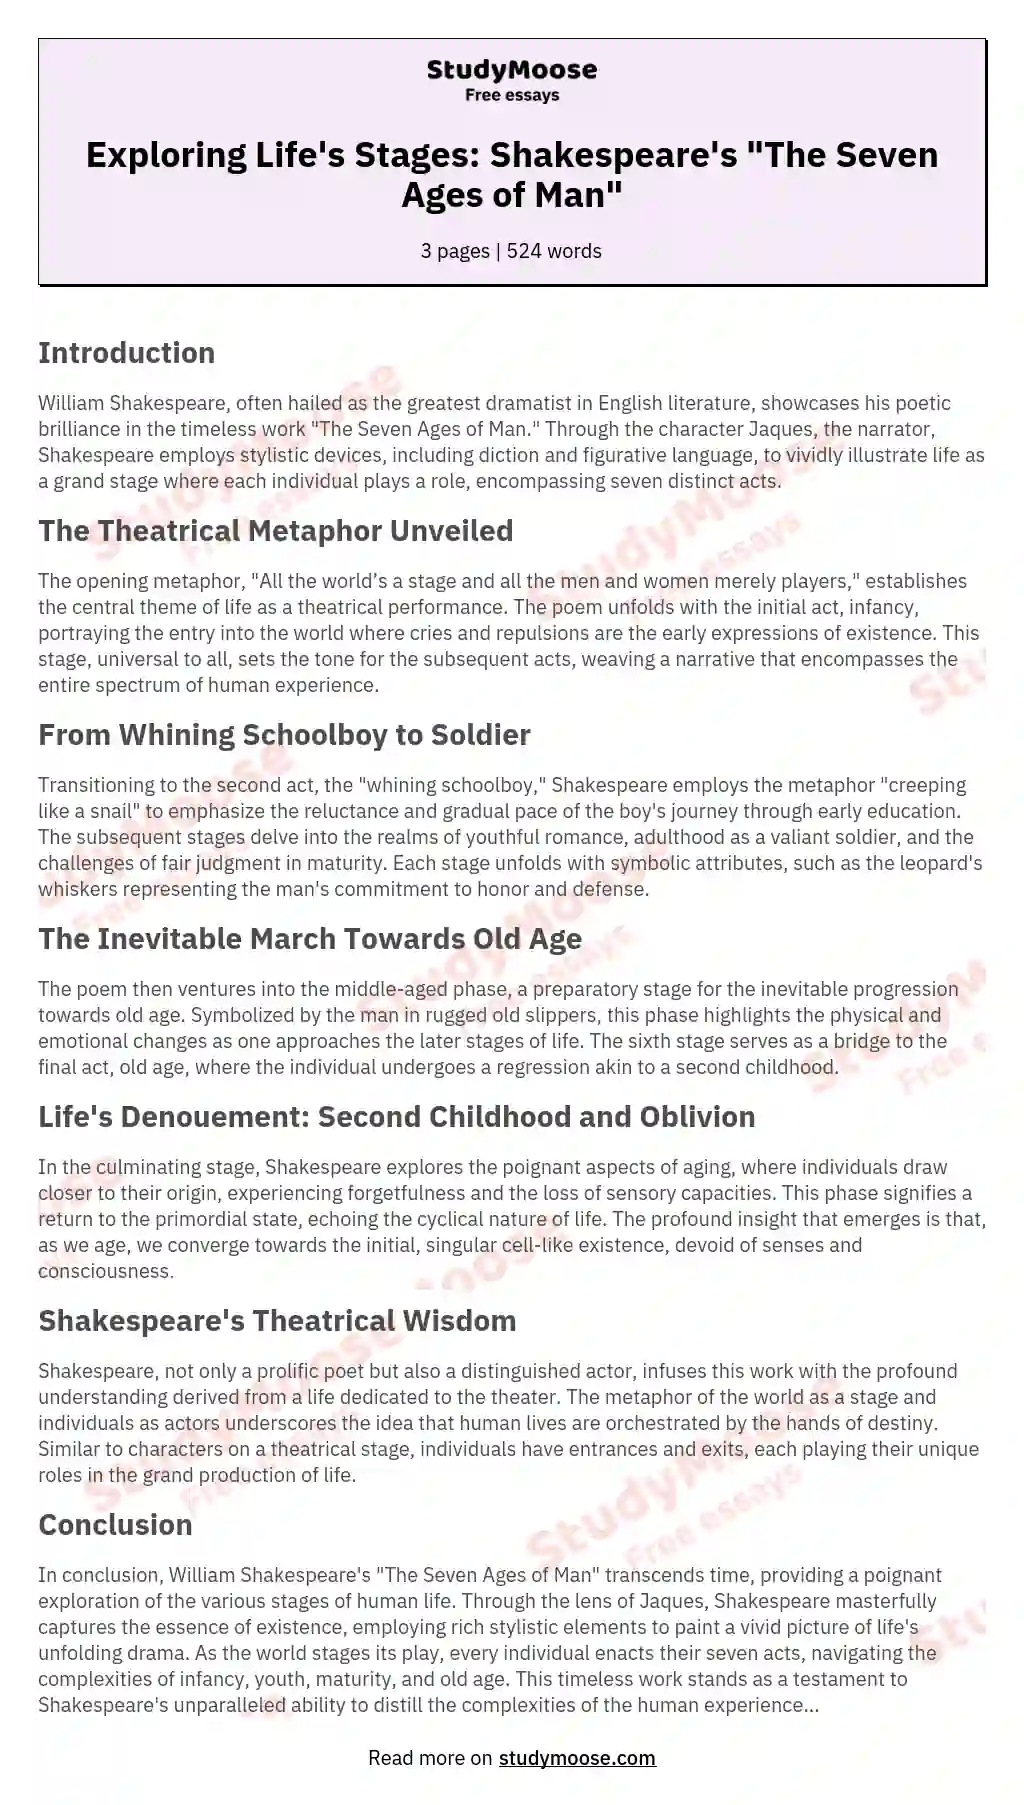 Exploring Life's Stages: Shakespeare's "The Seven Ages of Man" essay